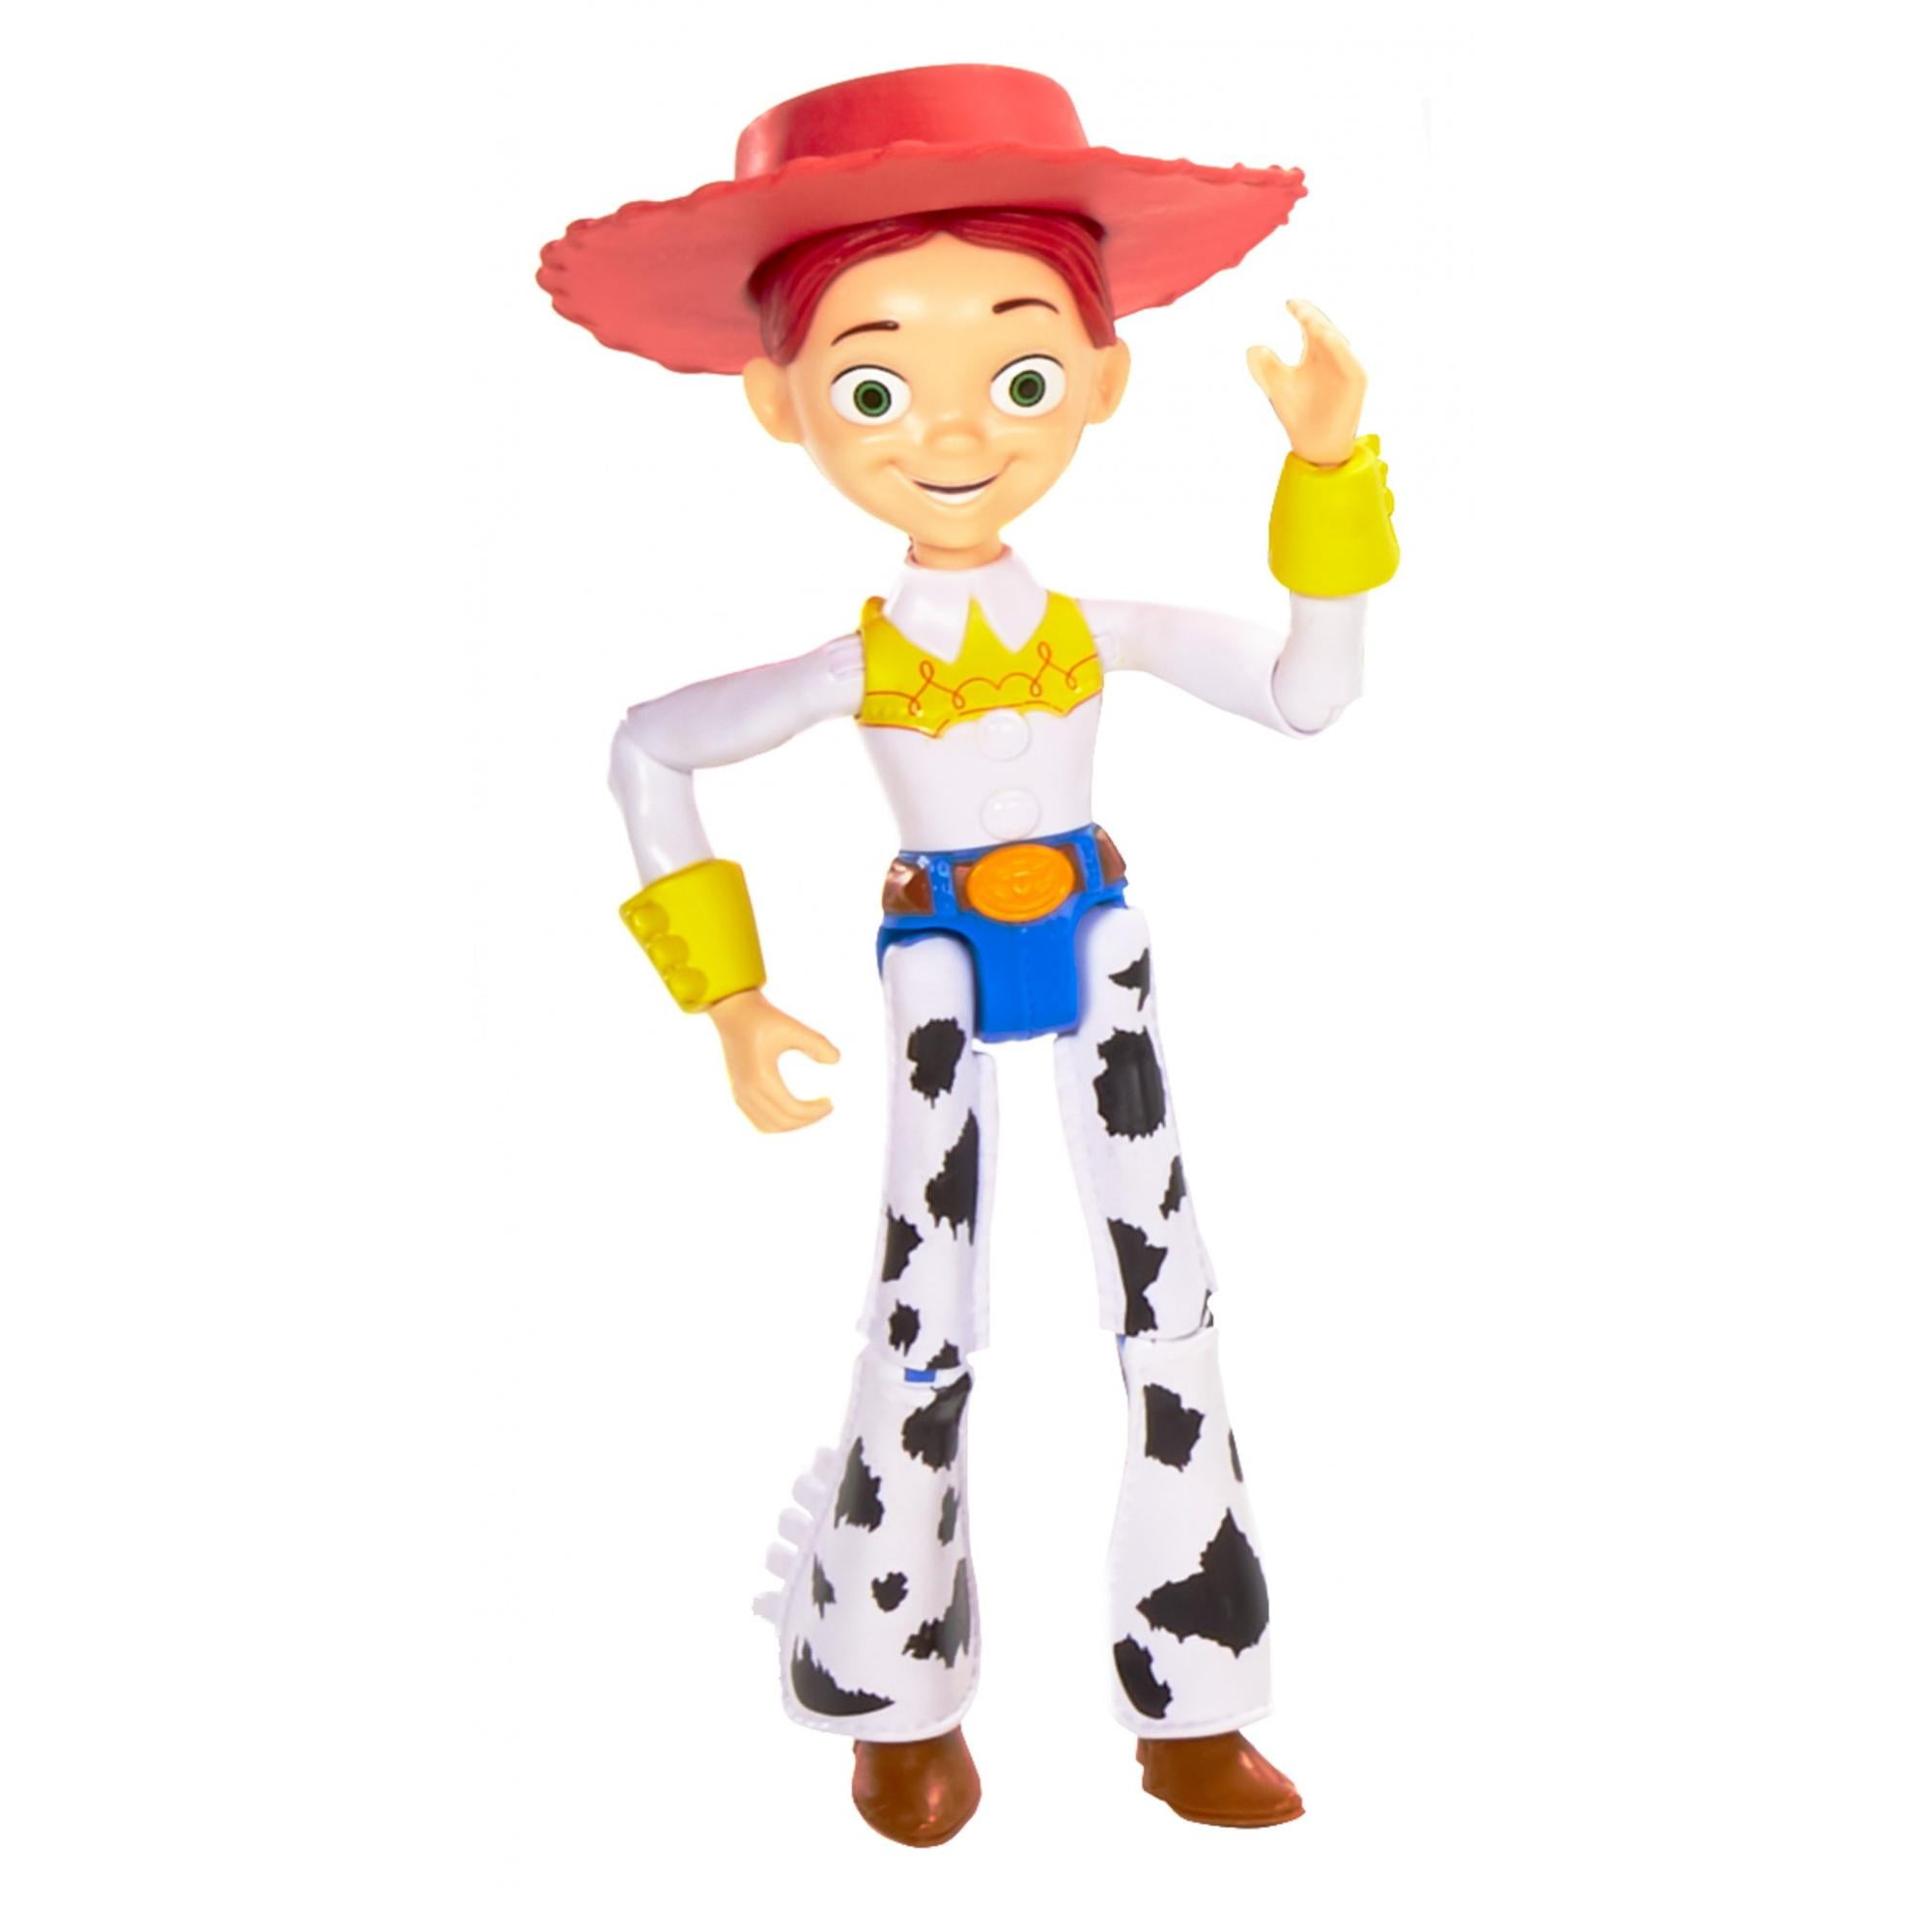 Toy Story Pixar Cowgirl Jessie Deluxe Pull-String Action Figure New in Package 